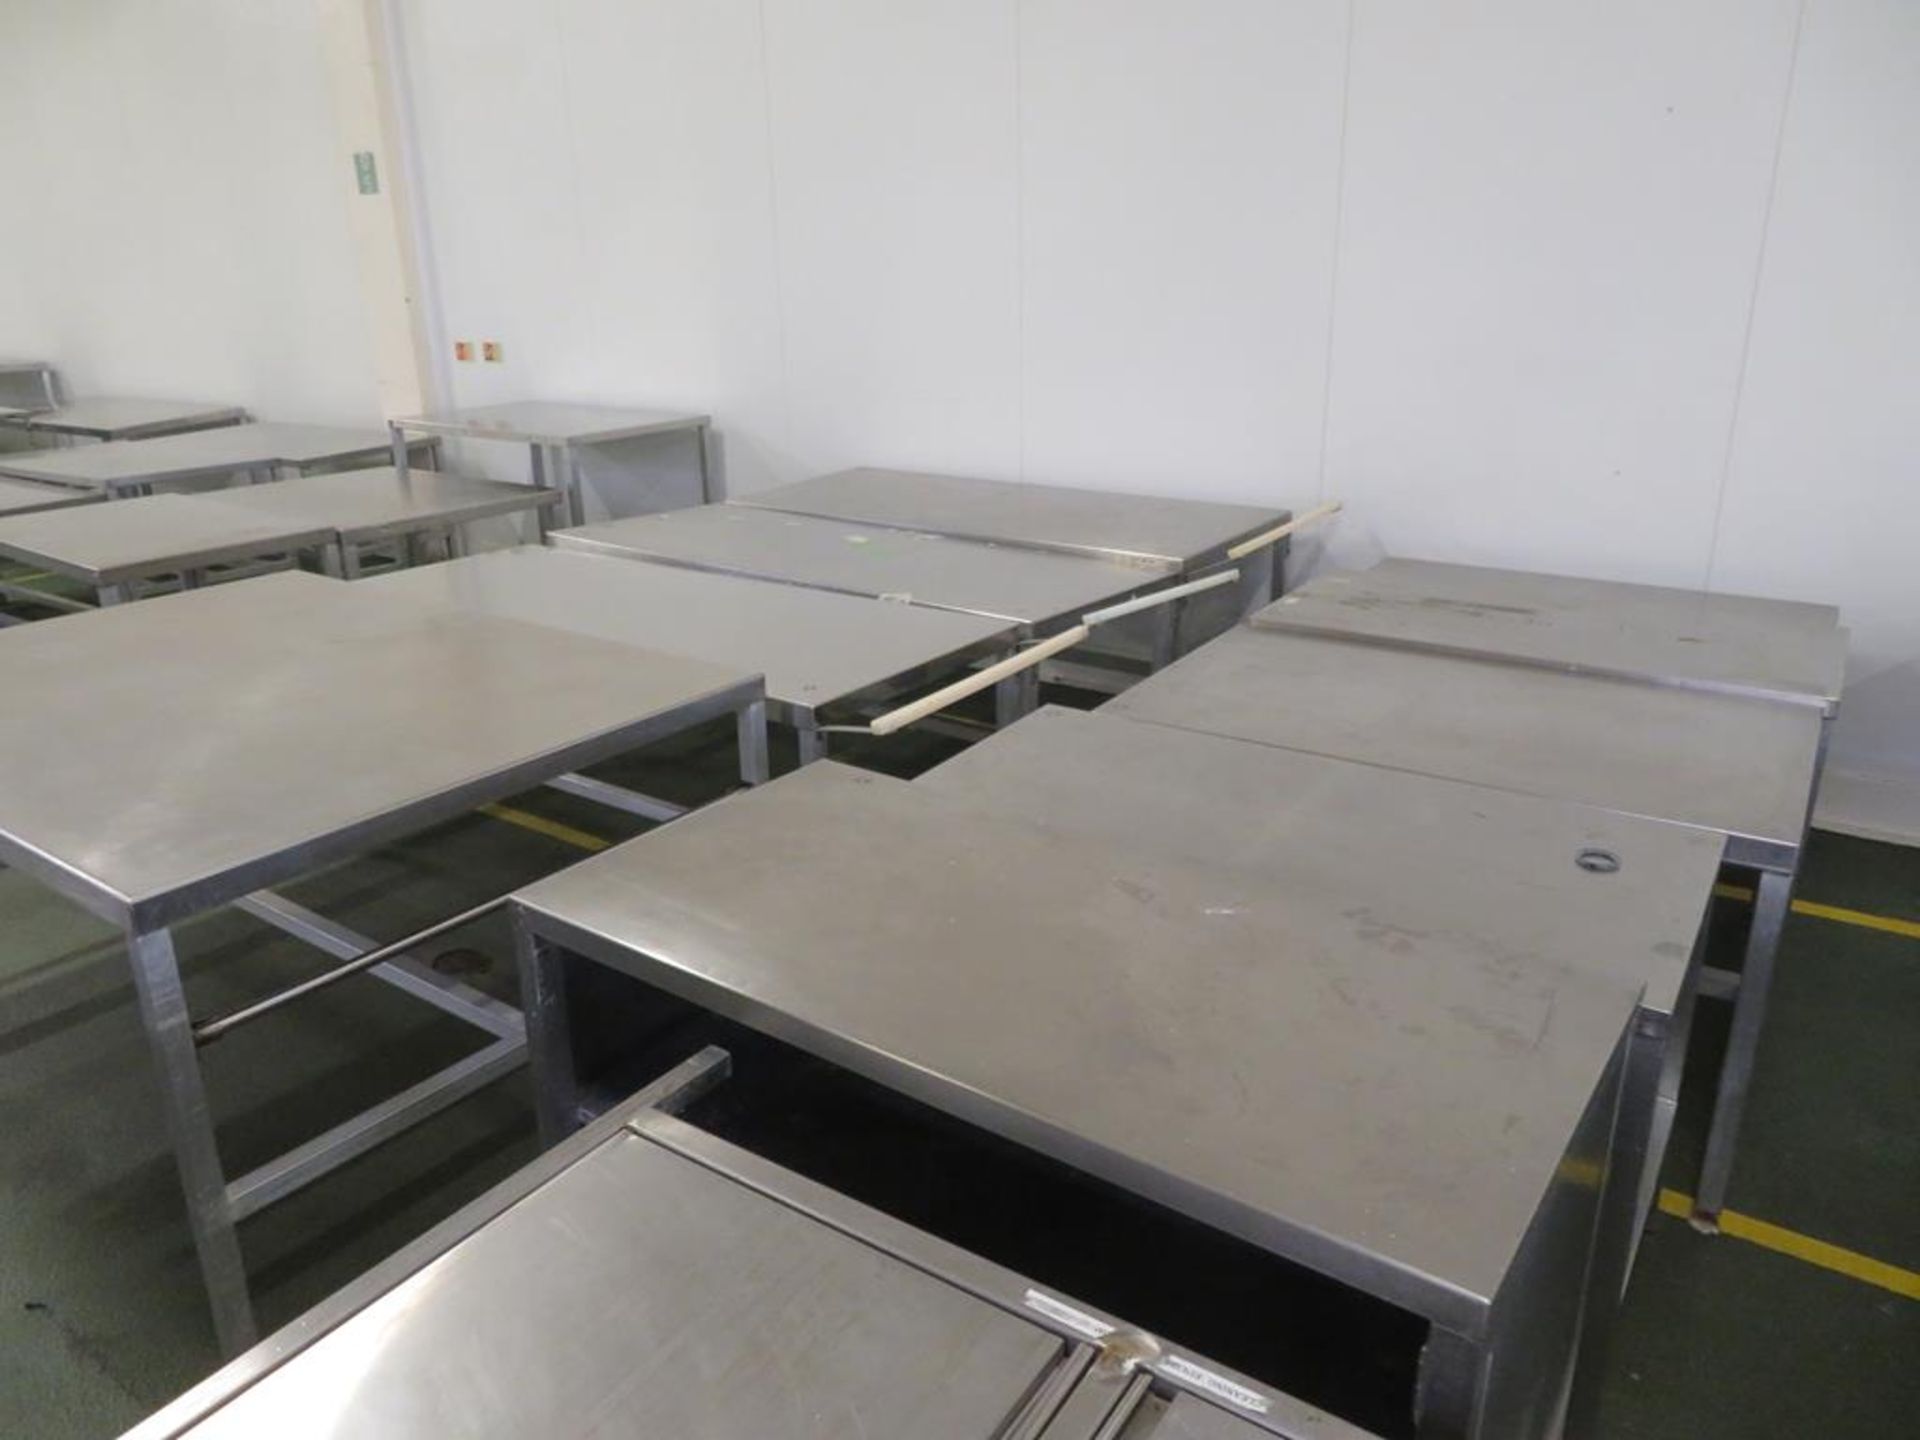 8 x Stainless Steel Topped Aluminium based Tables (the largest 1700 x 1200mm) and an open fronted ca - Image 3 of 3